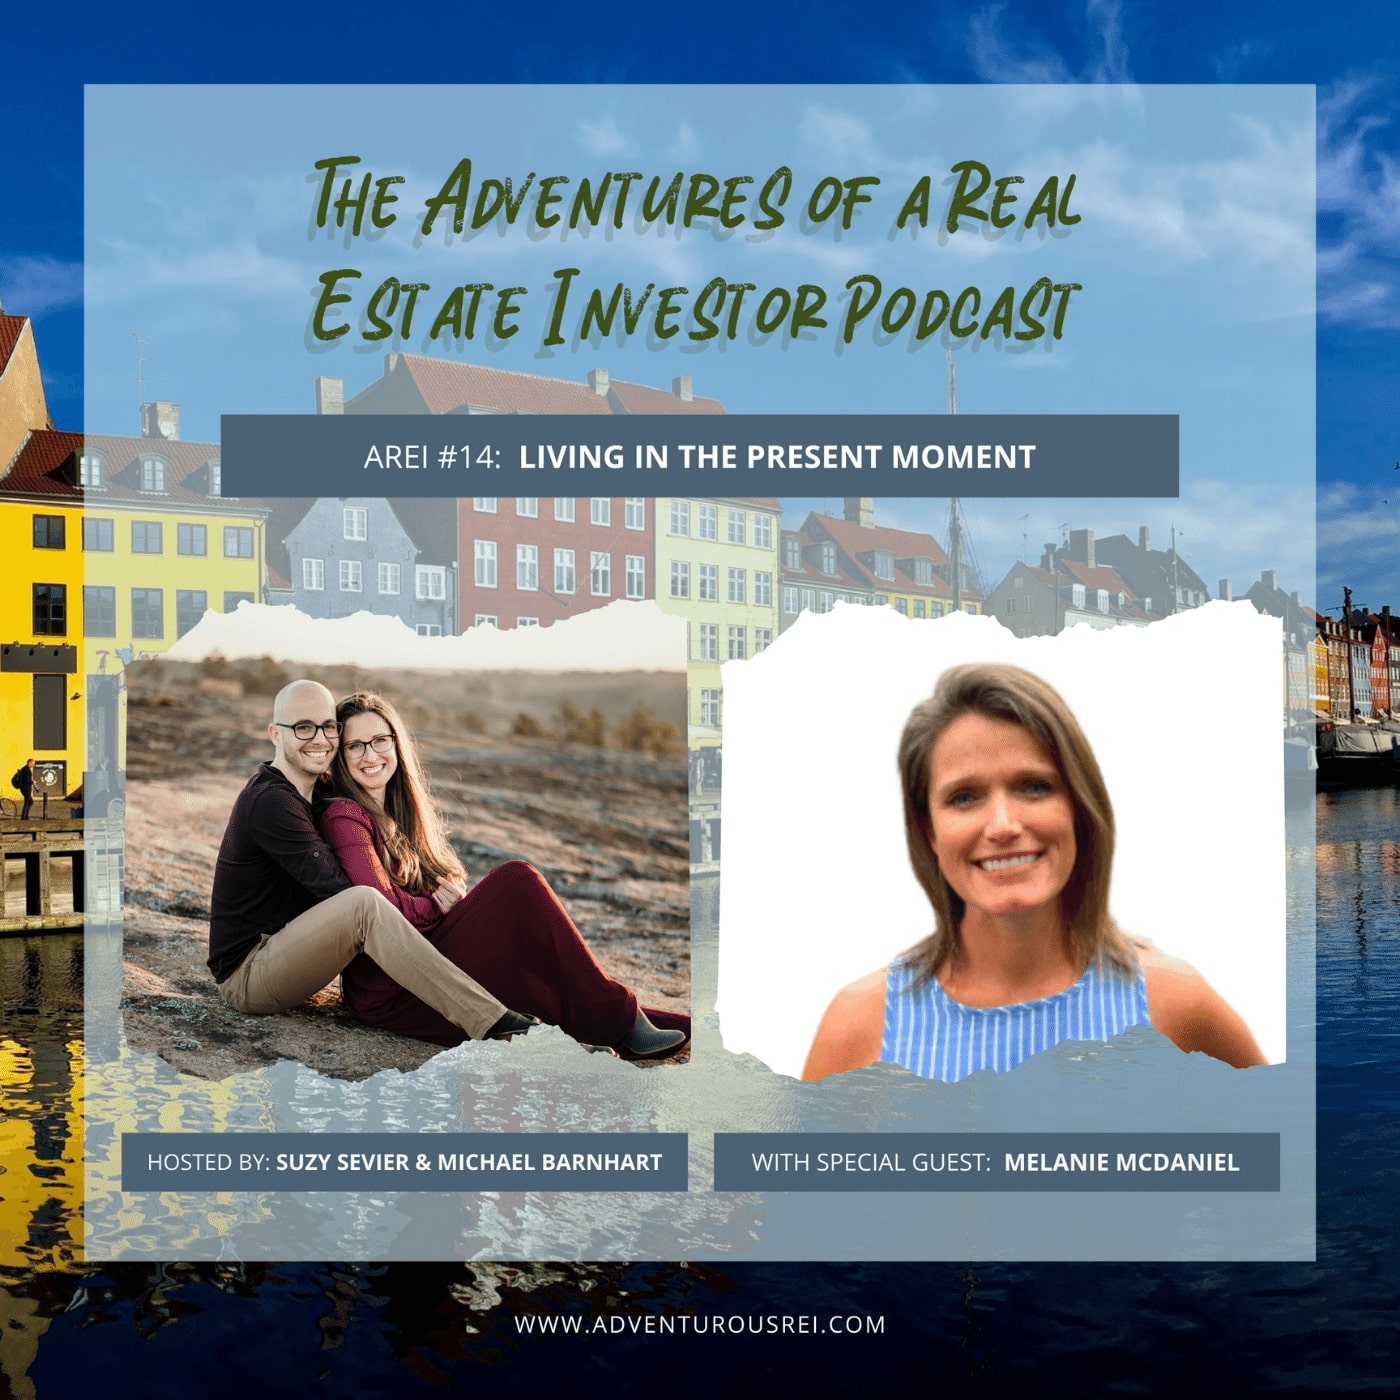 The Adventures of a Real Estate Investor